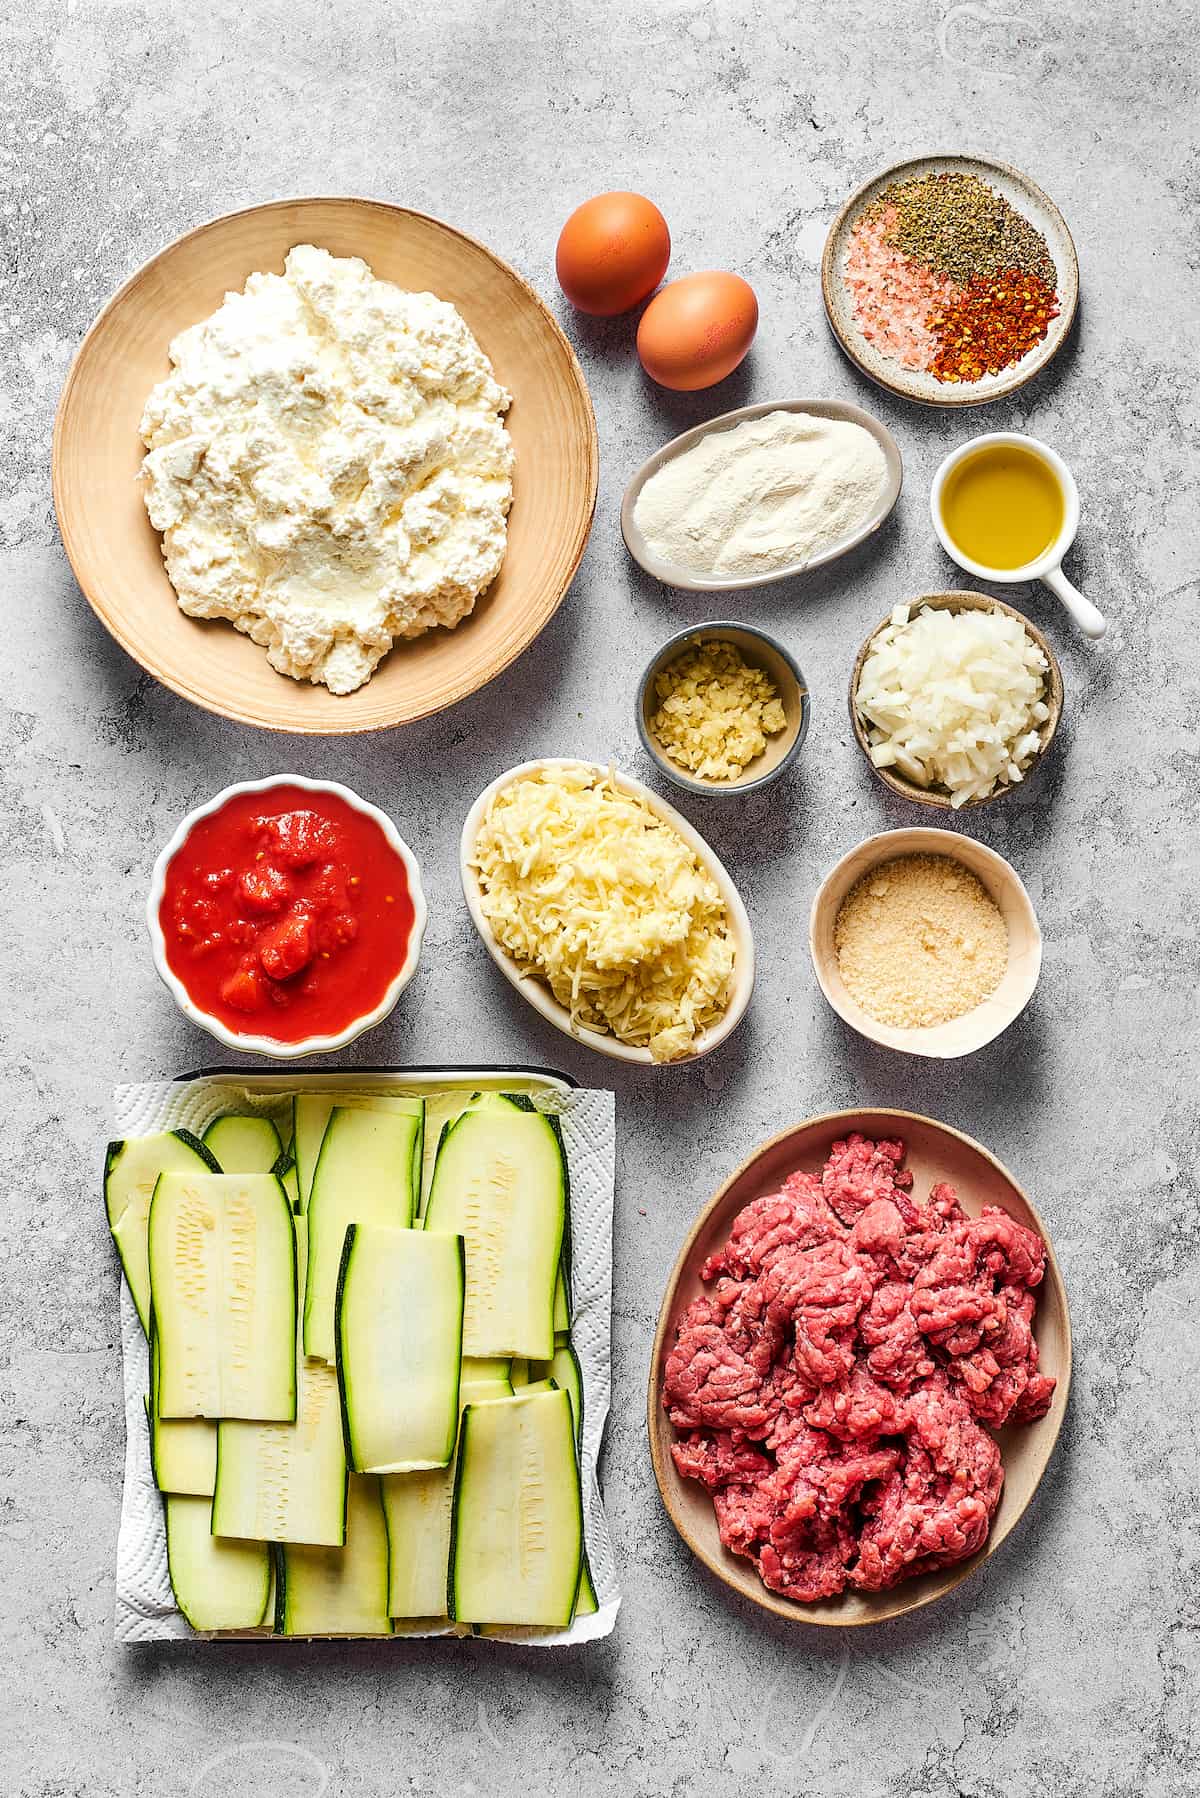 From top left: Cottage cheese, eggs, seasonings, four, olive oil, garlic, diced onion, crushed tomatoes, mozzarella, Parmesan, zucchini slices, ground beef.